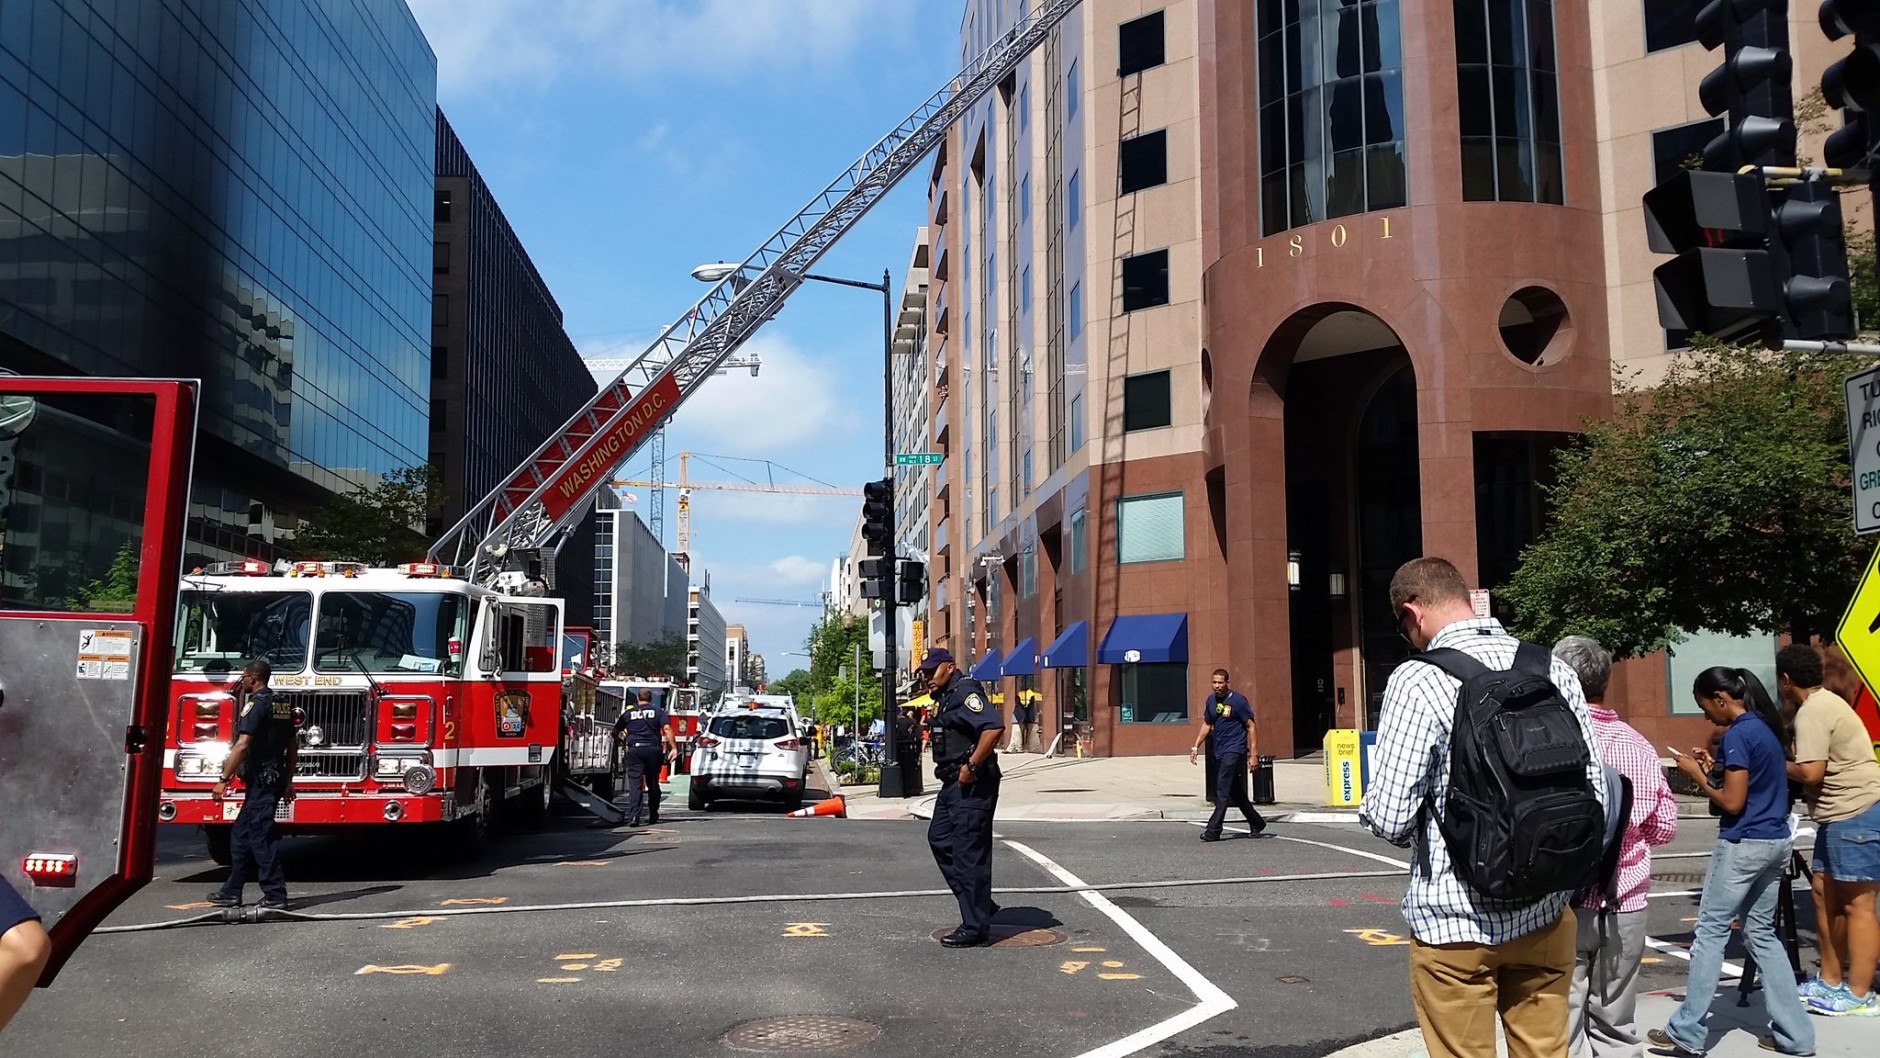 The building across the street, at 1801 L Street, was evacuated at about 10:45 a.m. (WTOP/Kathy Stewart)